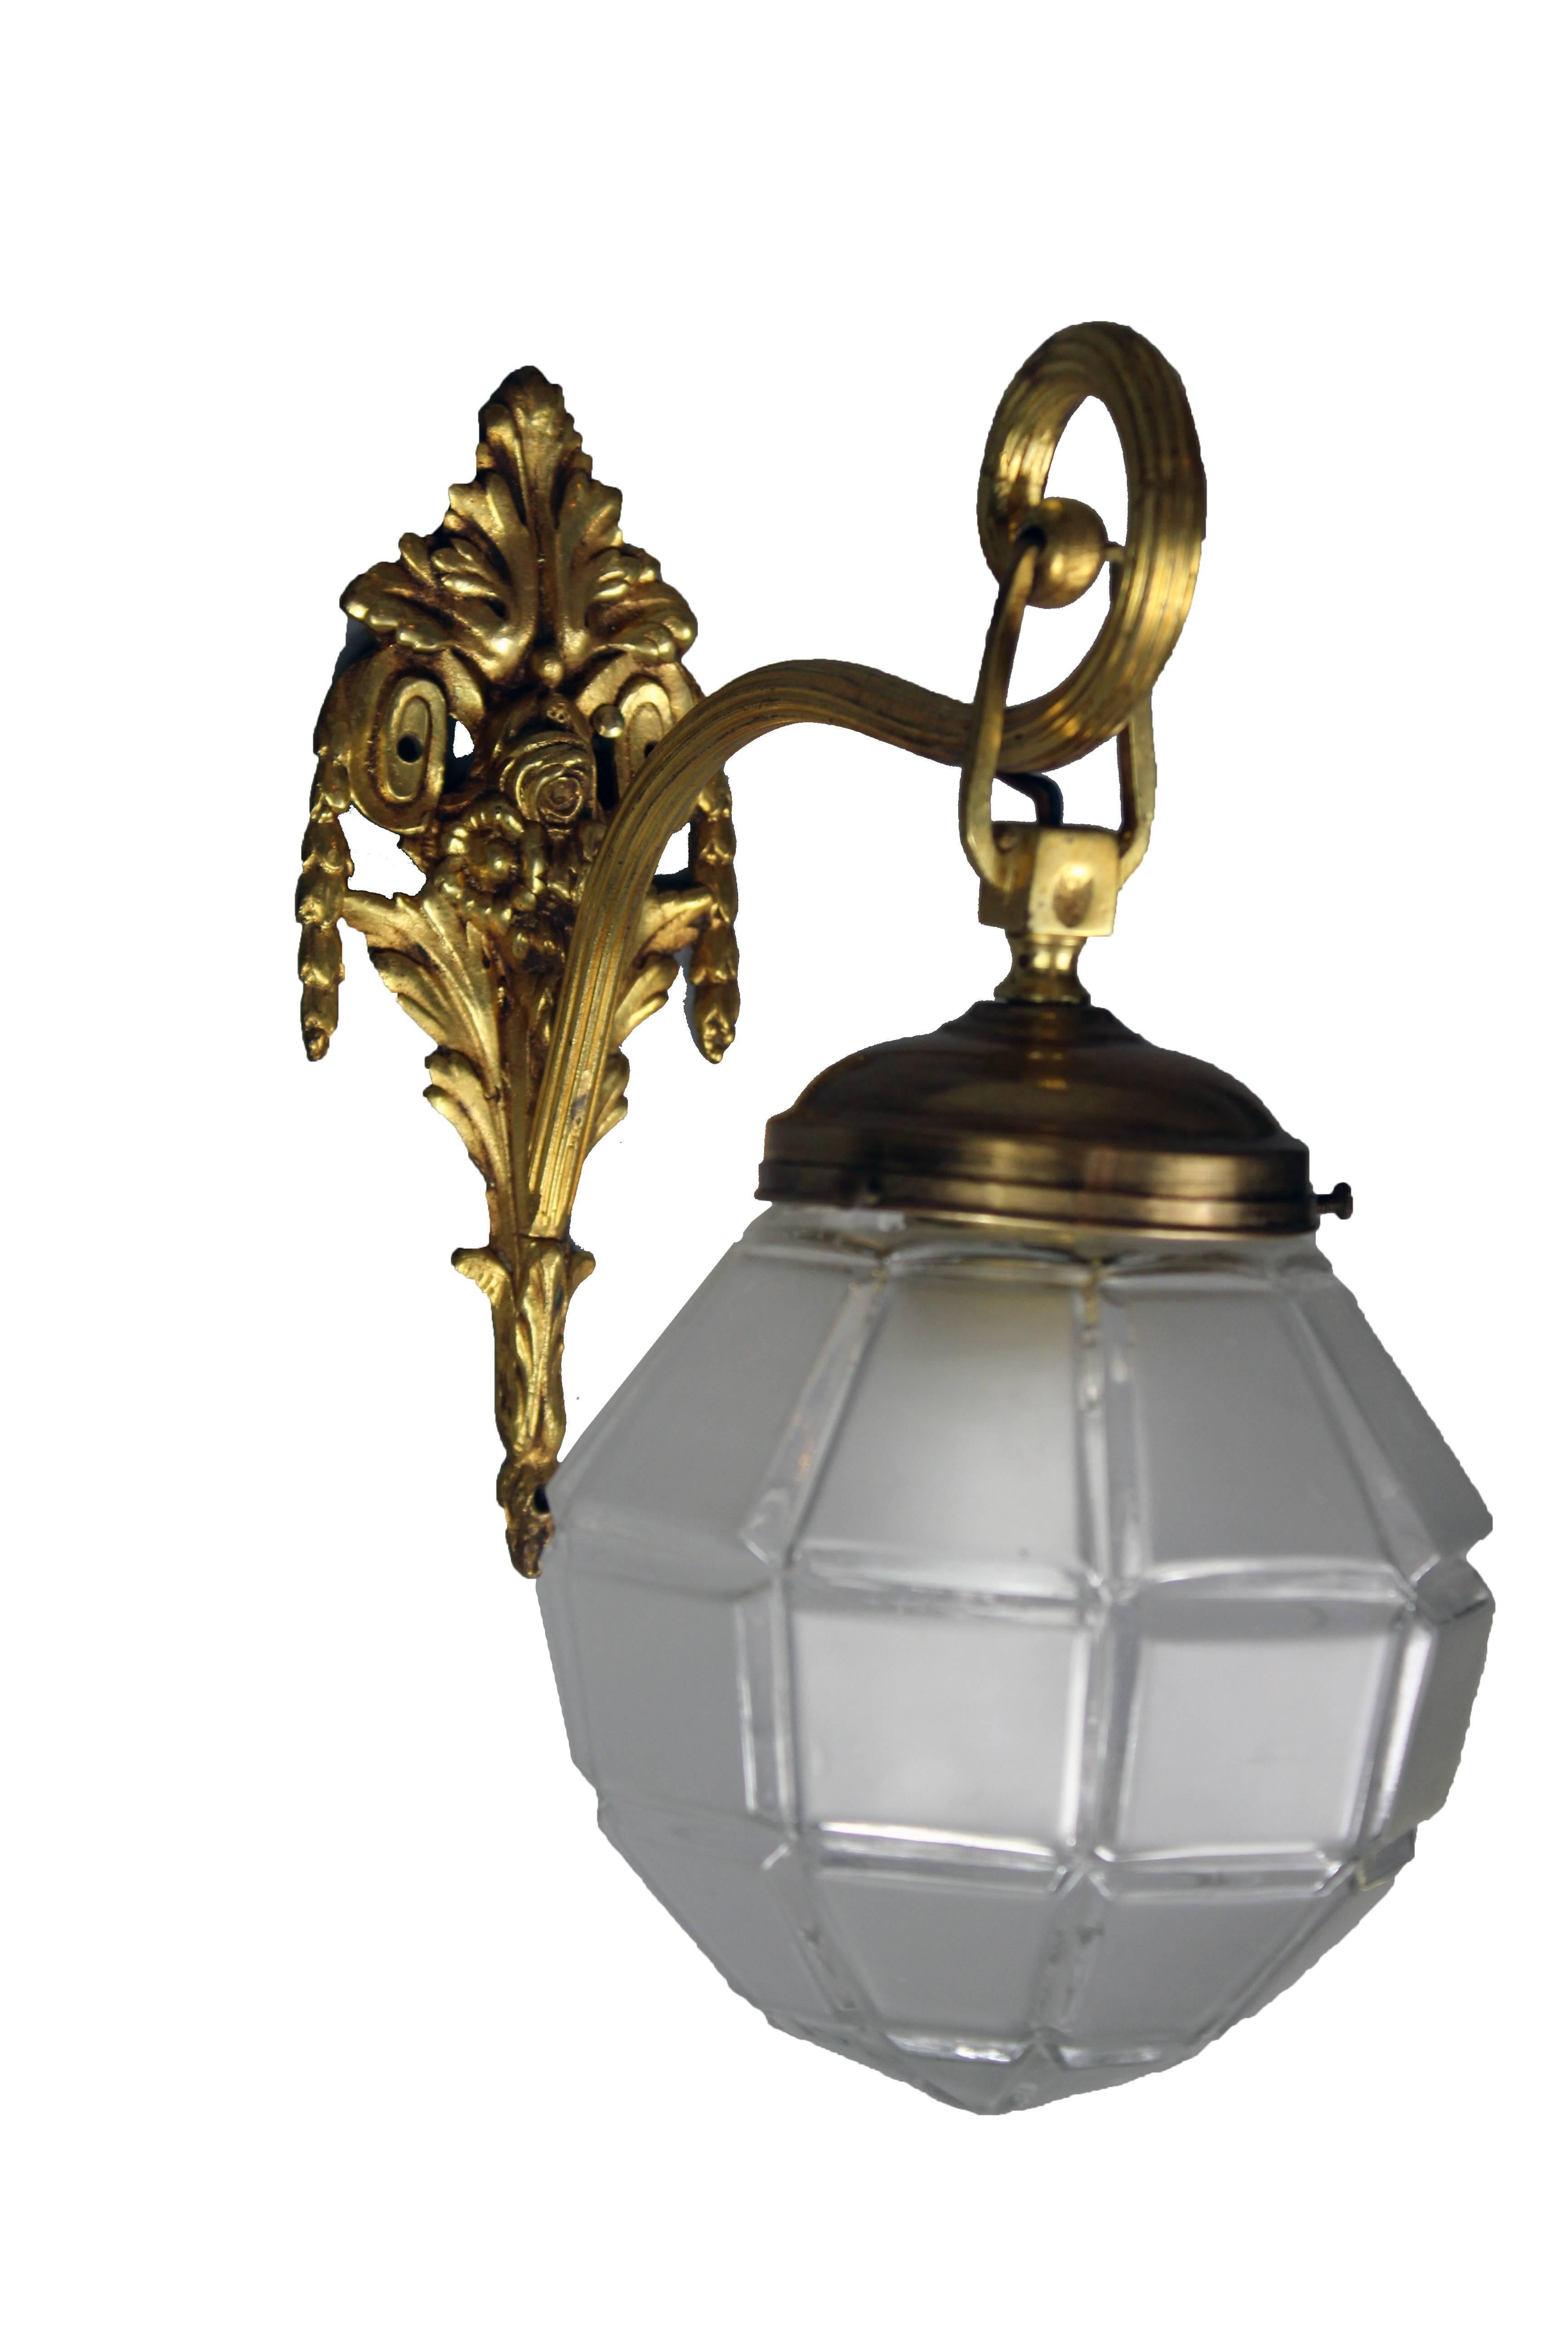 Wall light made of brass and glass, looks like a little lantern. 
Made in Italy, circa 1940. 
Good conditions.